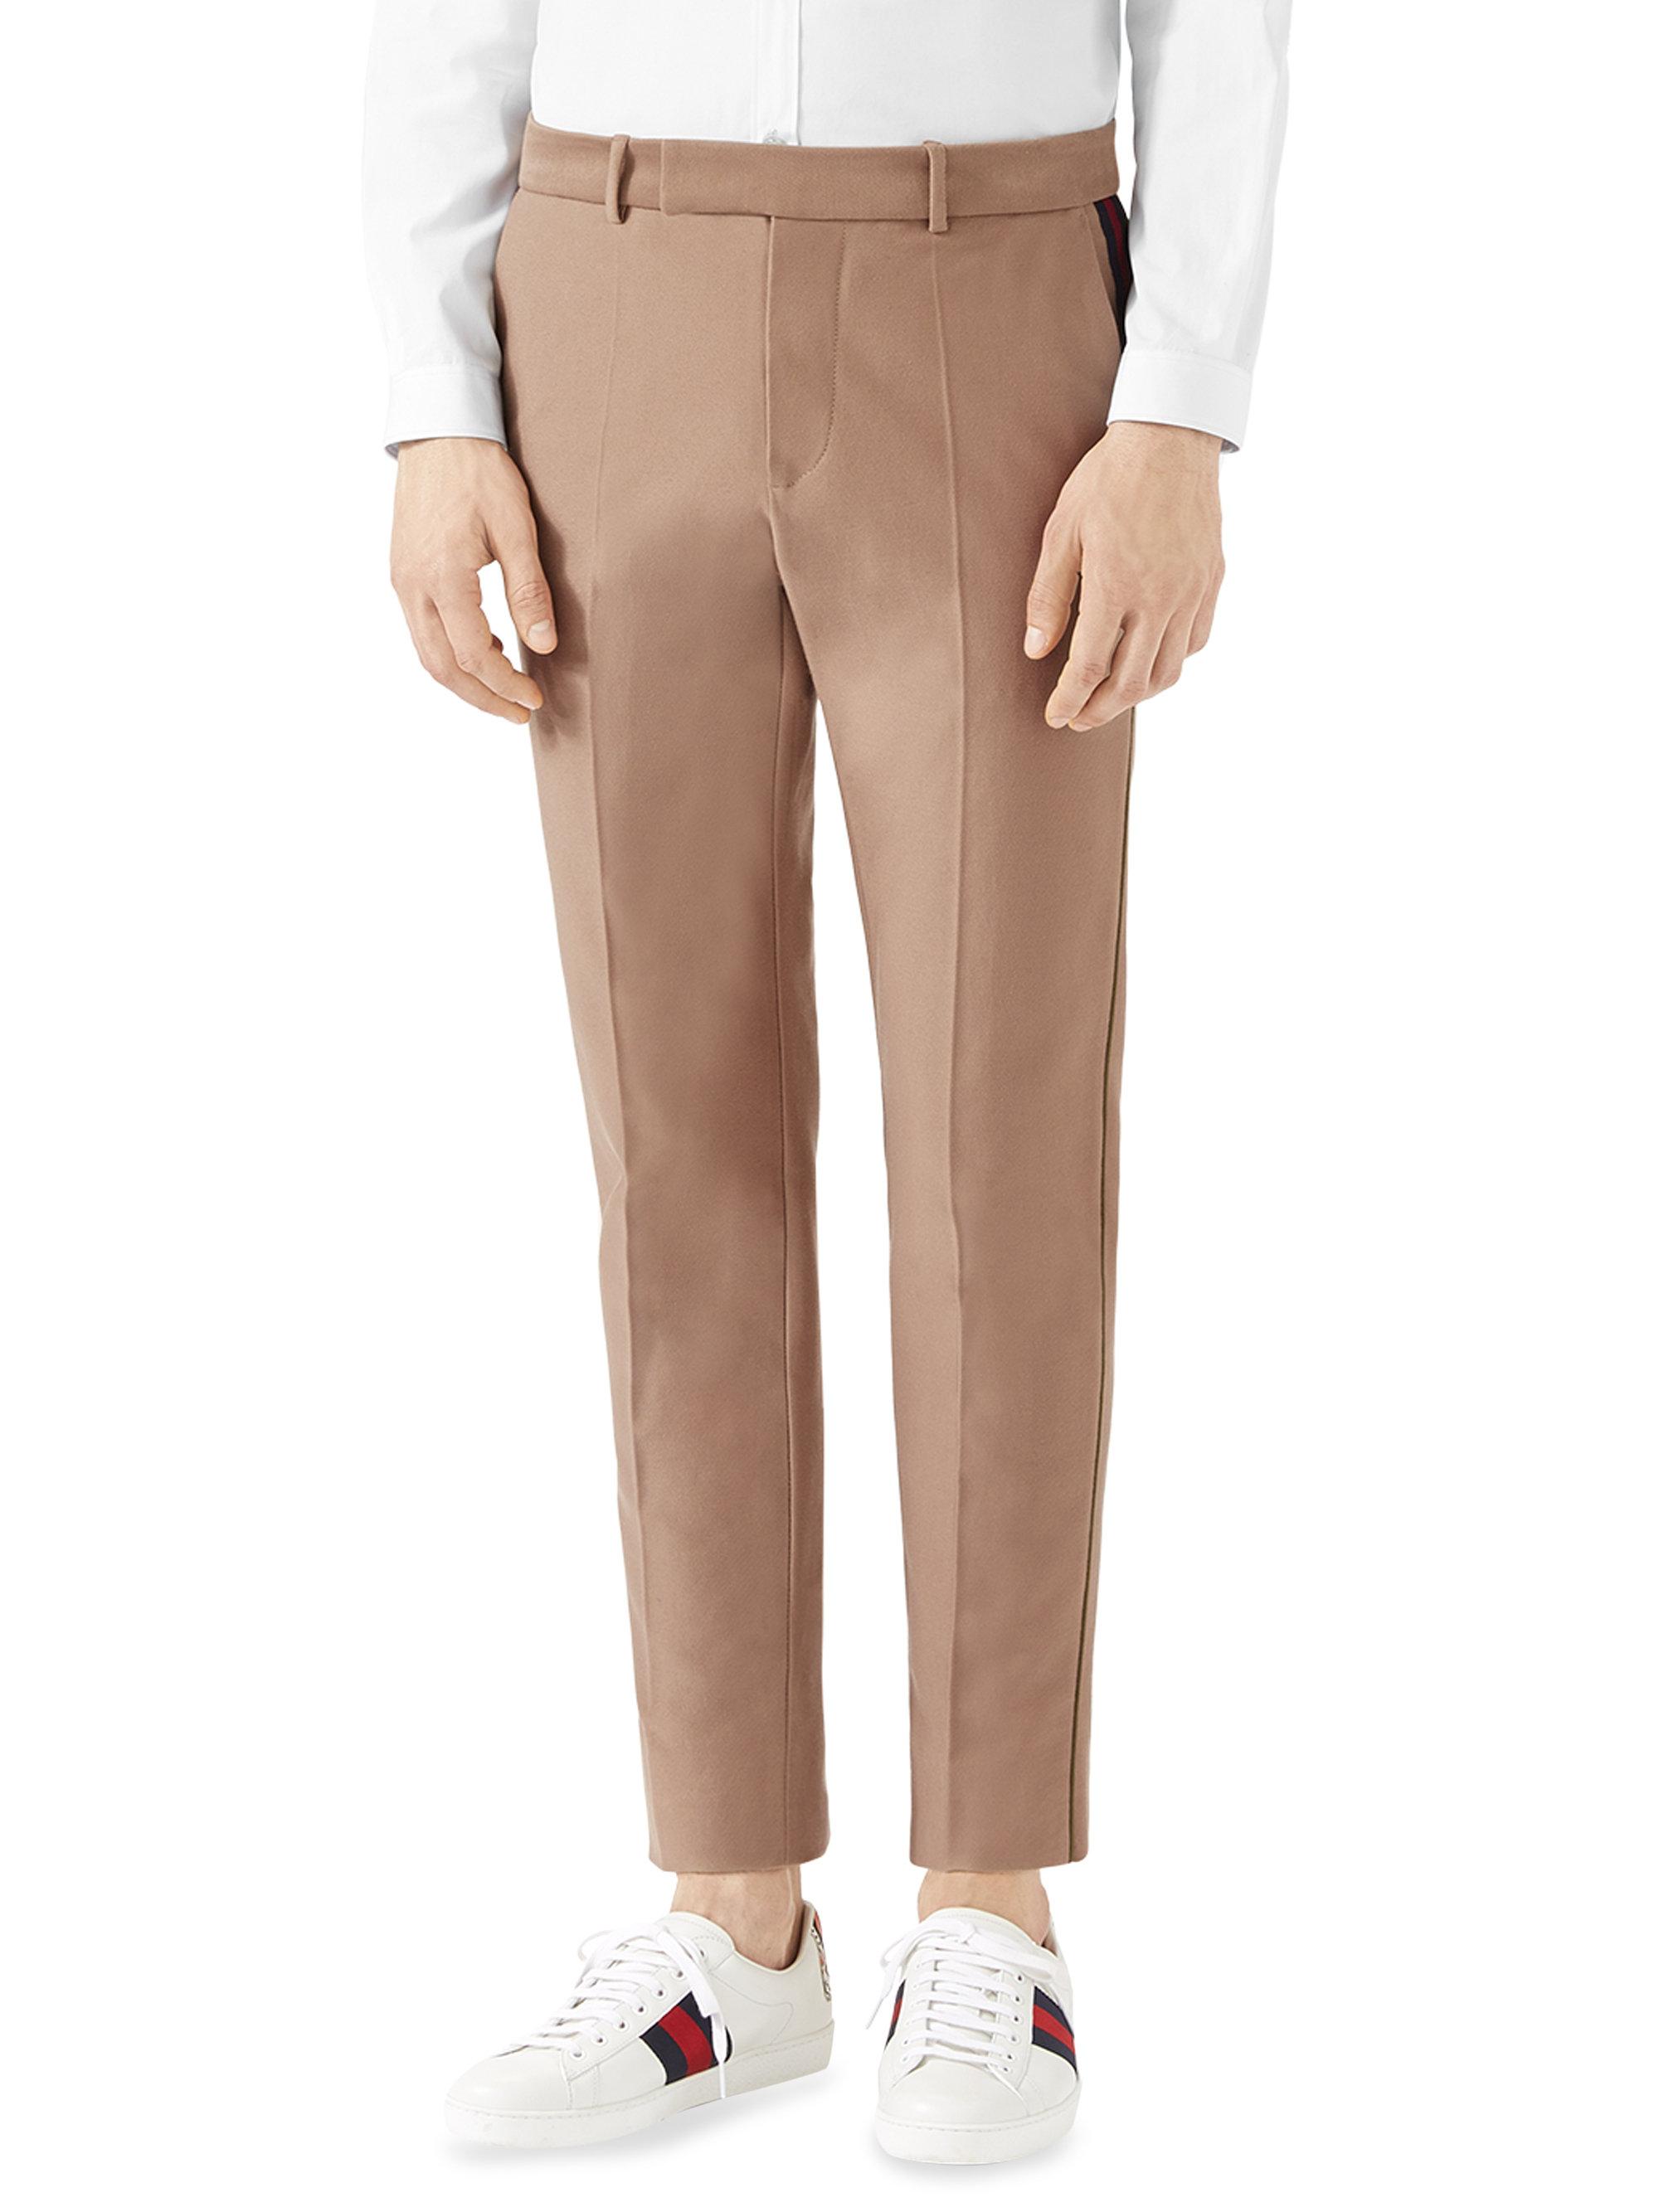 gucci formal pants, OFF 72%,welcome to buy!